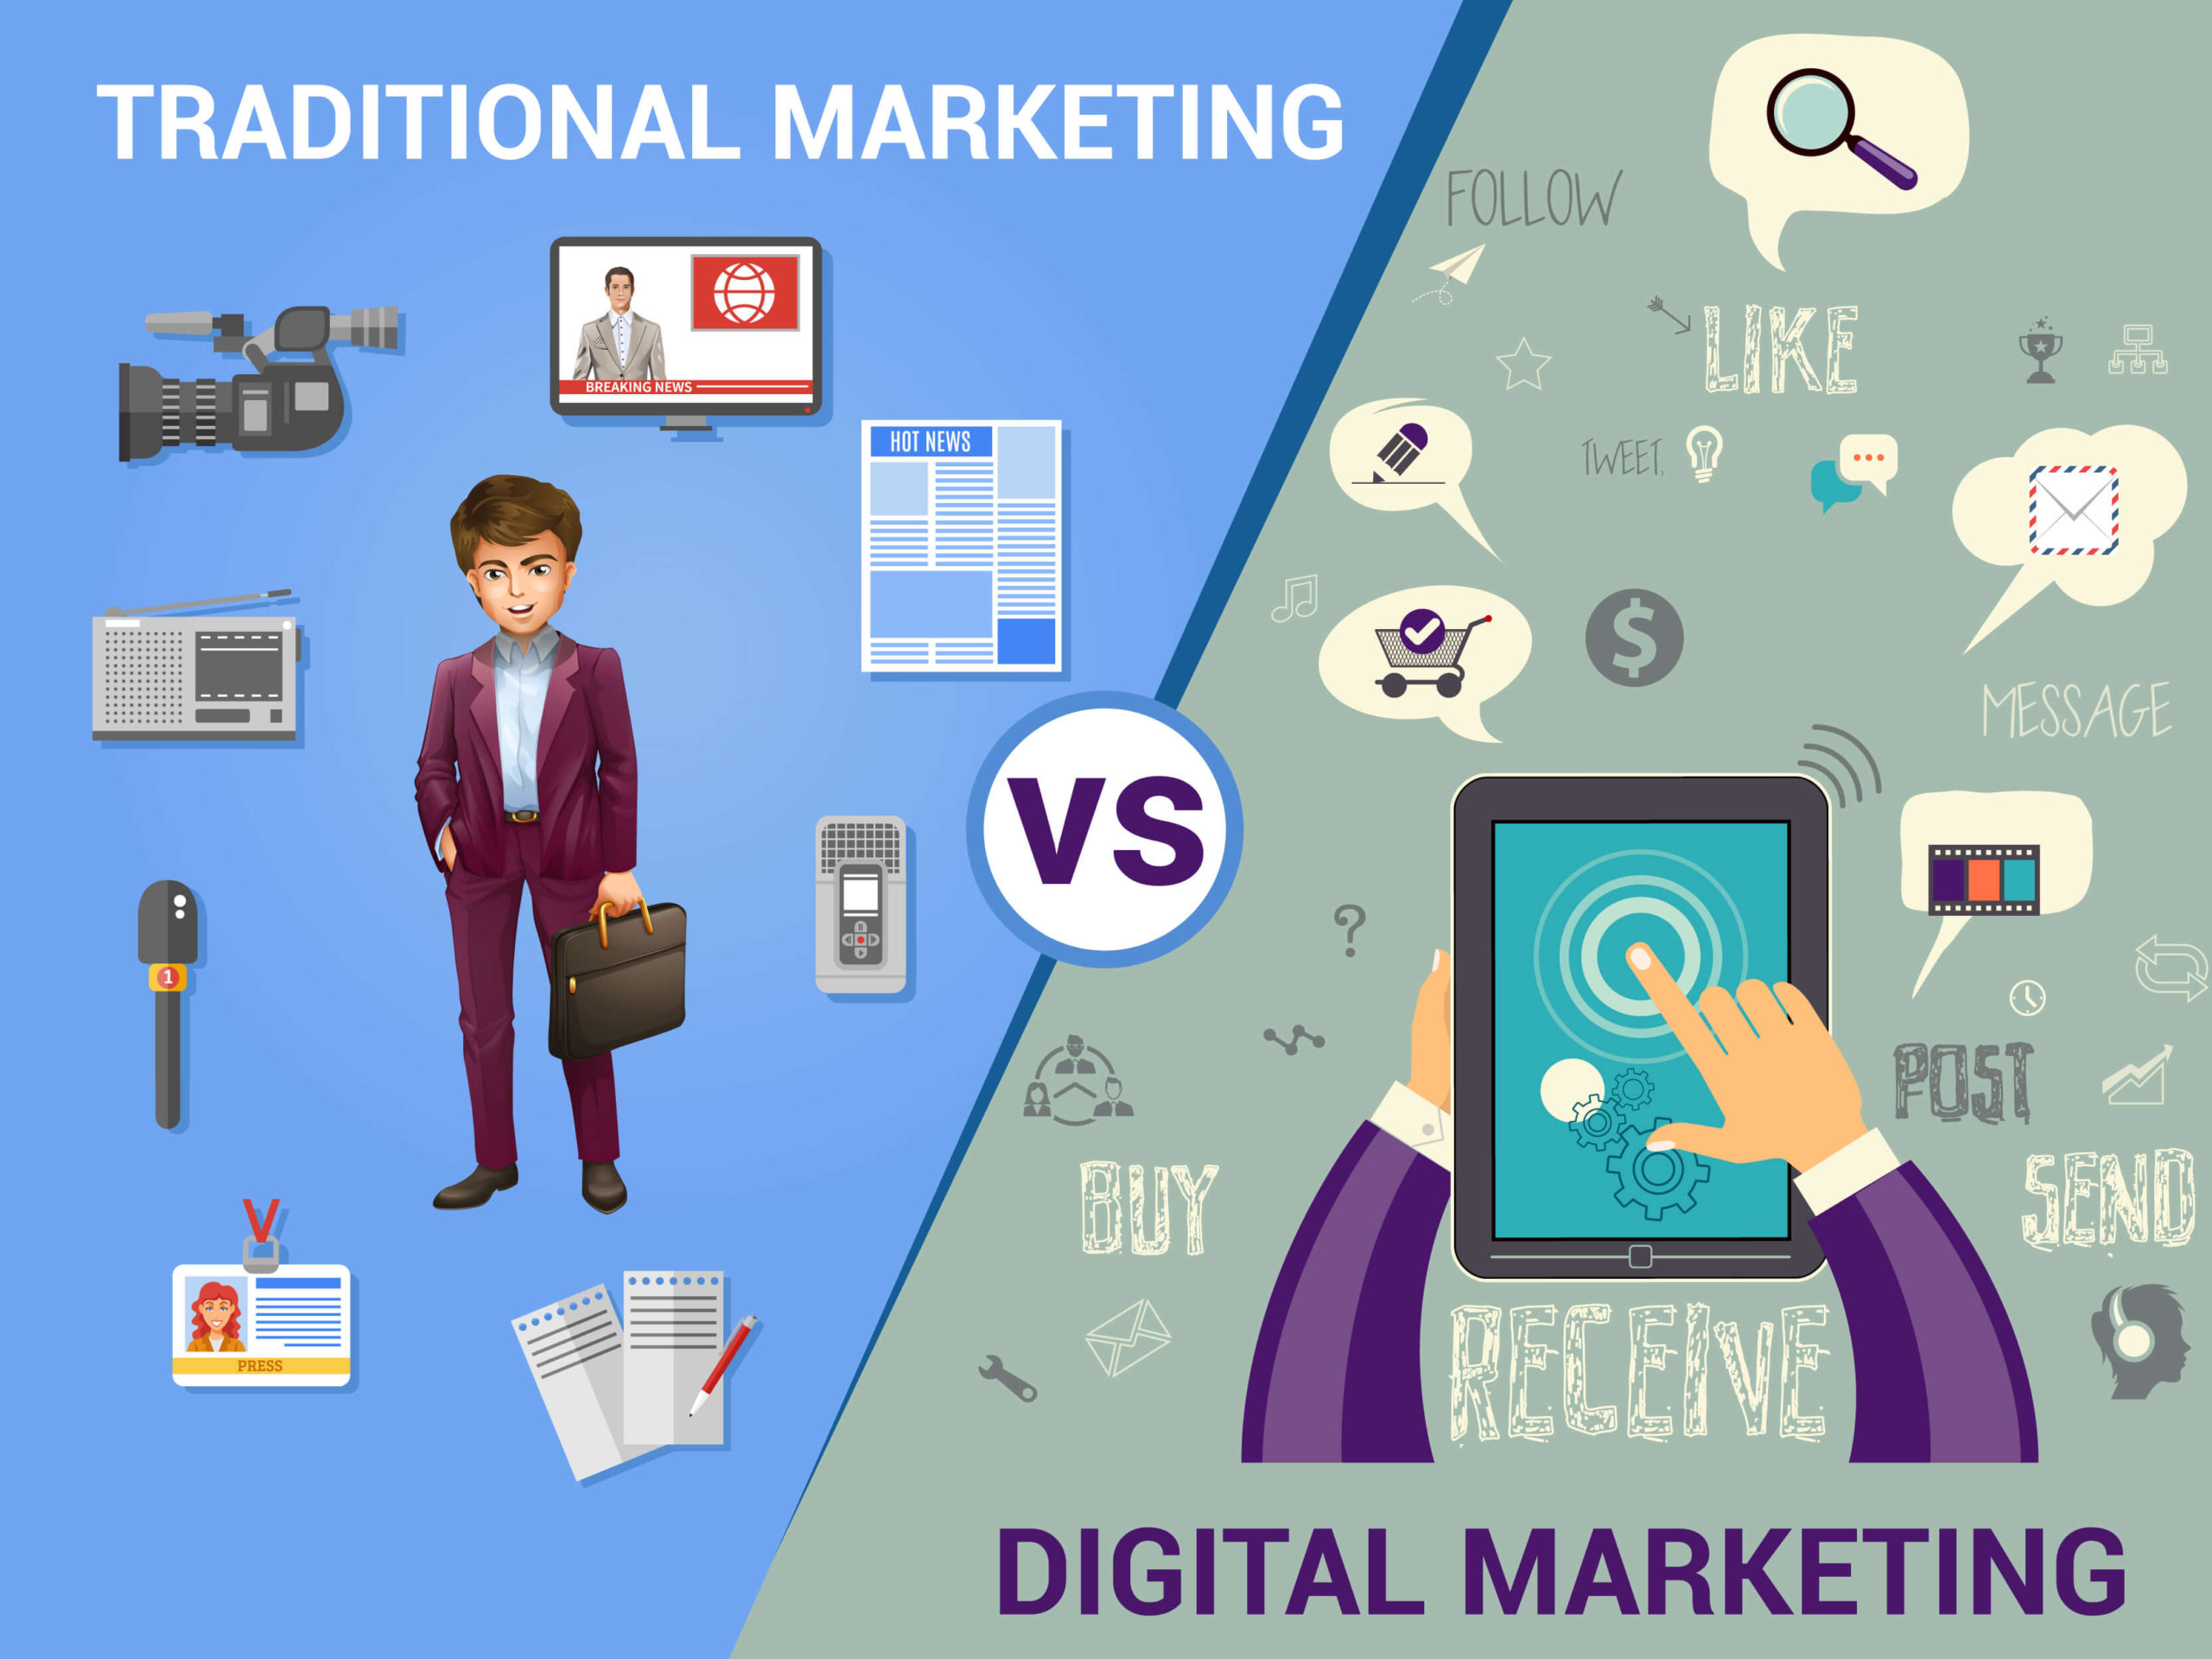 Digital Marketing Vs Traditional Marketing | Which One Should You Choose